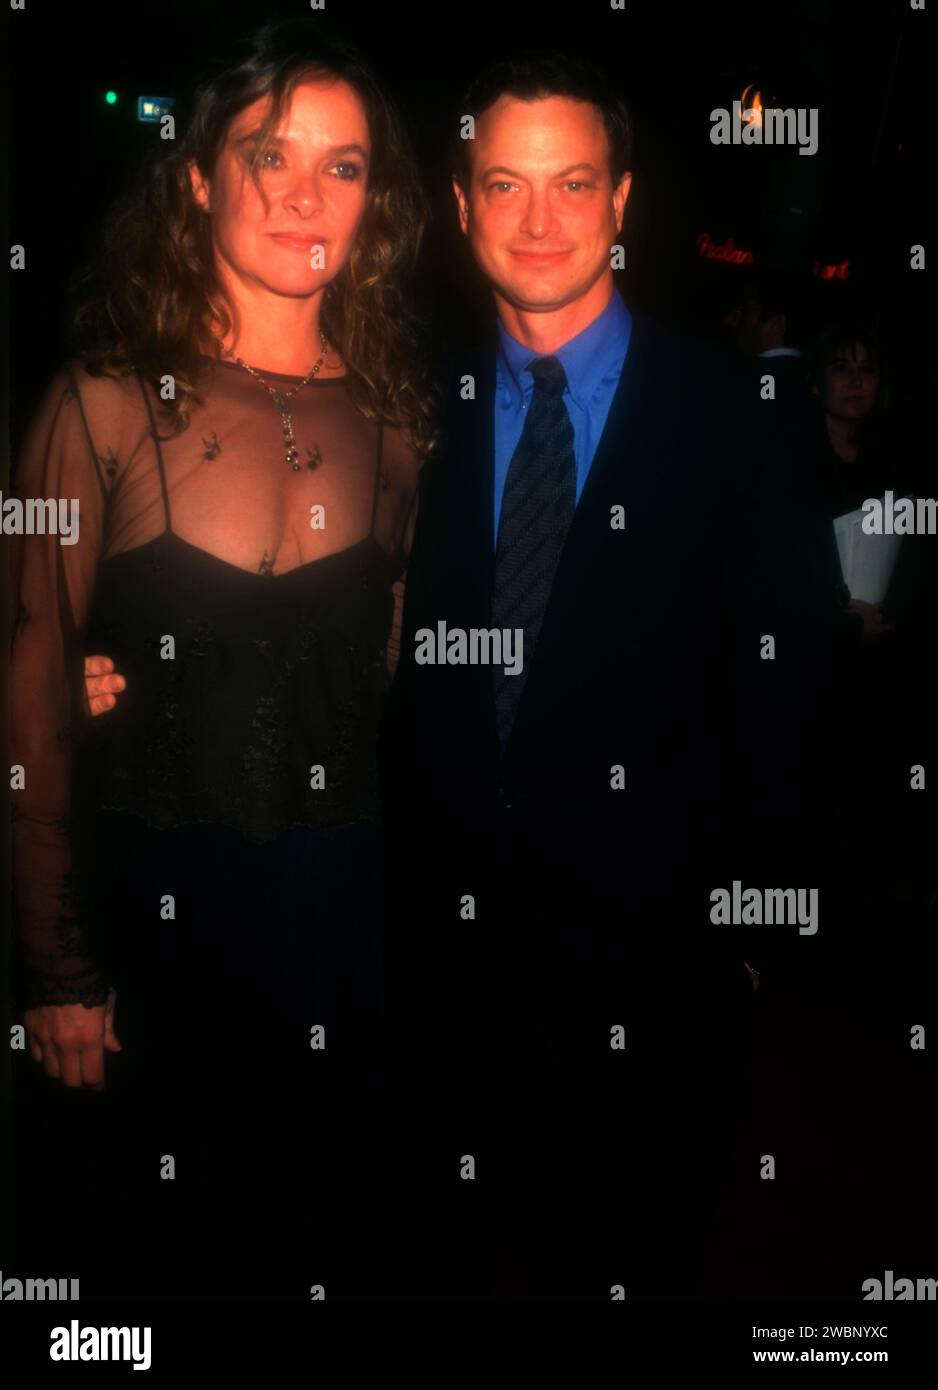 Los Angeles, California, USA 1st November 1996 Actor Gary Sinise and wife Moira Harris attend Touchstone Pictures Ransom Premiere at Mann Village Theatre on November 1, 1996 in Los Angeles, California, USA. Photo by Barry King/Alamy Stock Photo Stock Photo